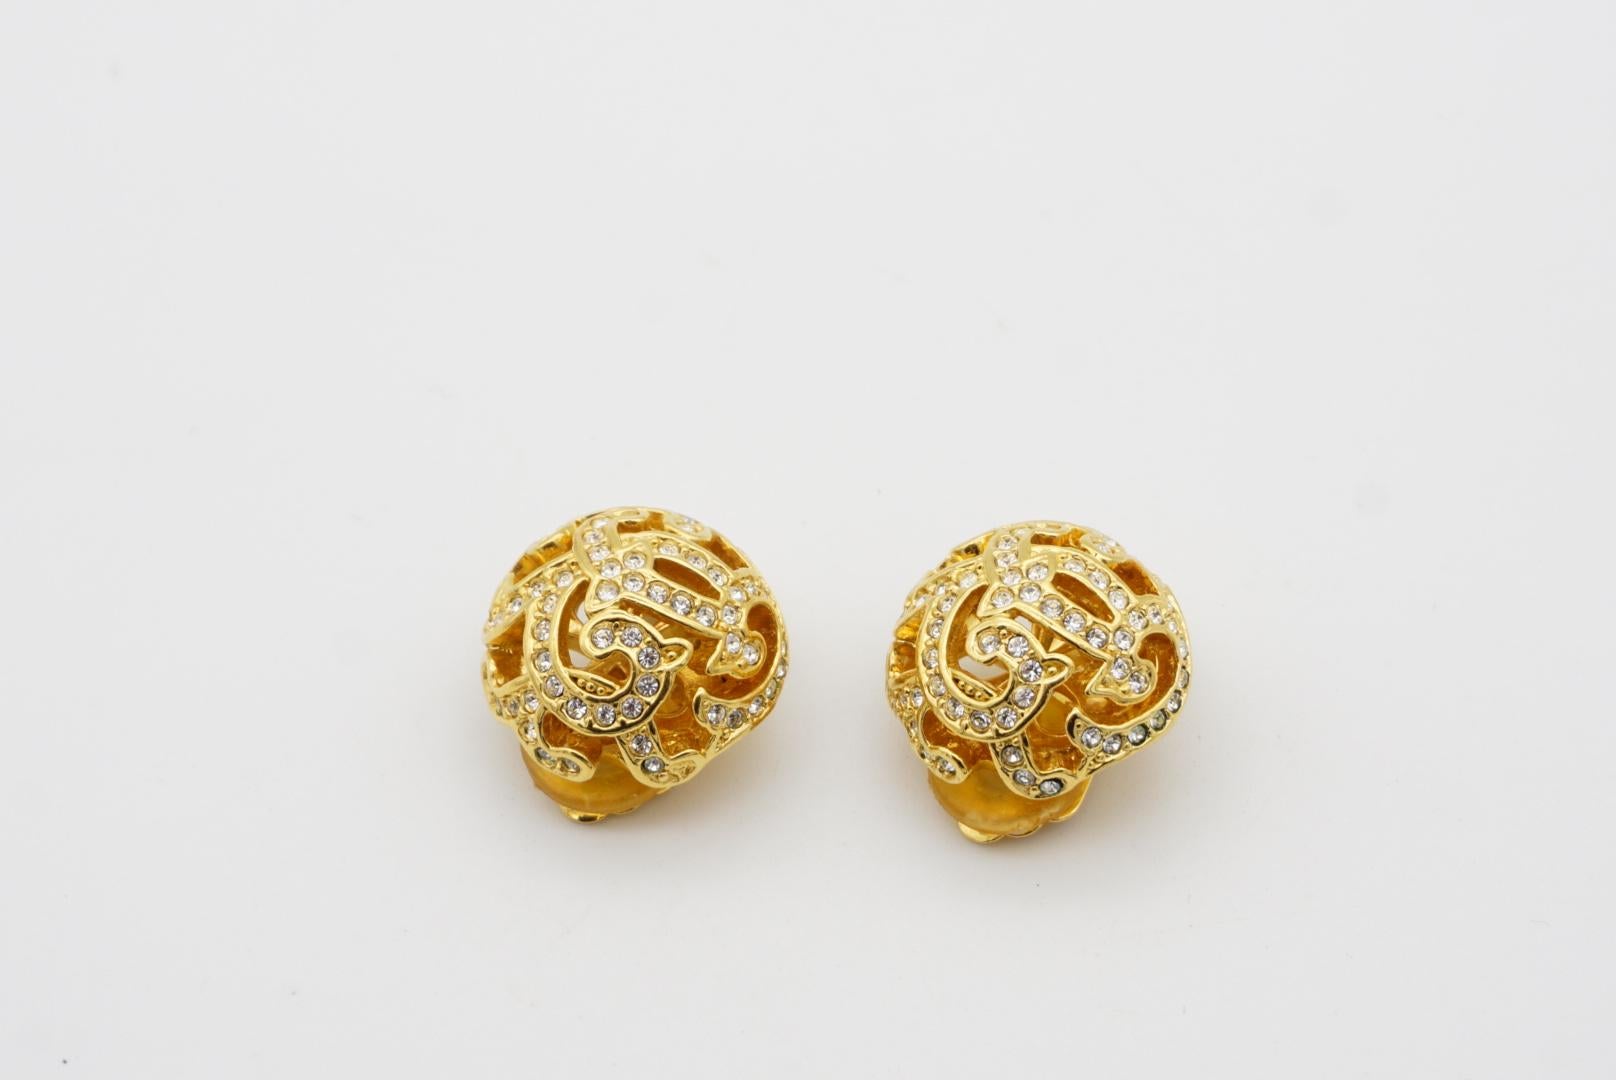 Christian Dior 1980s Round Ball Openwork Crystals Filigree Gold Clip Earrings In Excellent Condition For Sale In Wokingham, England